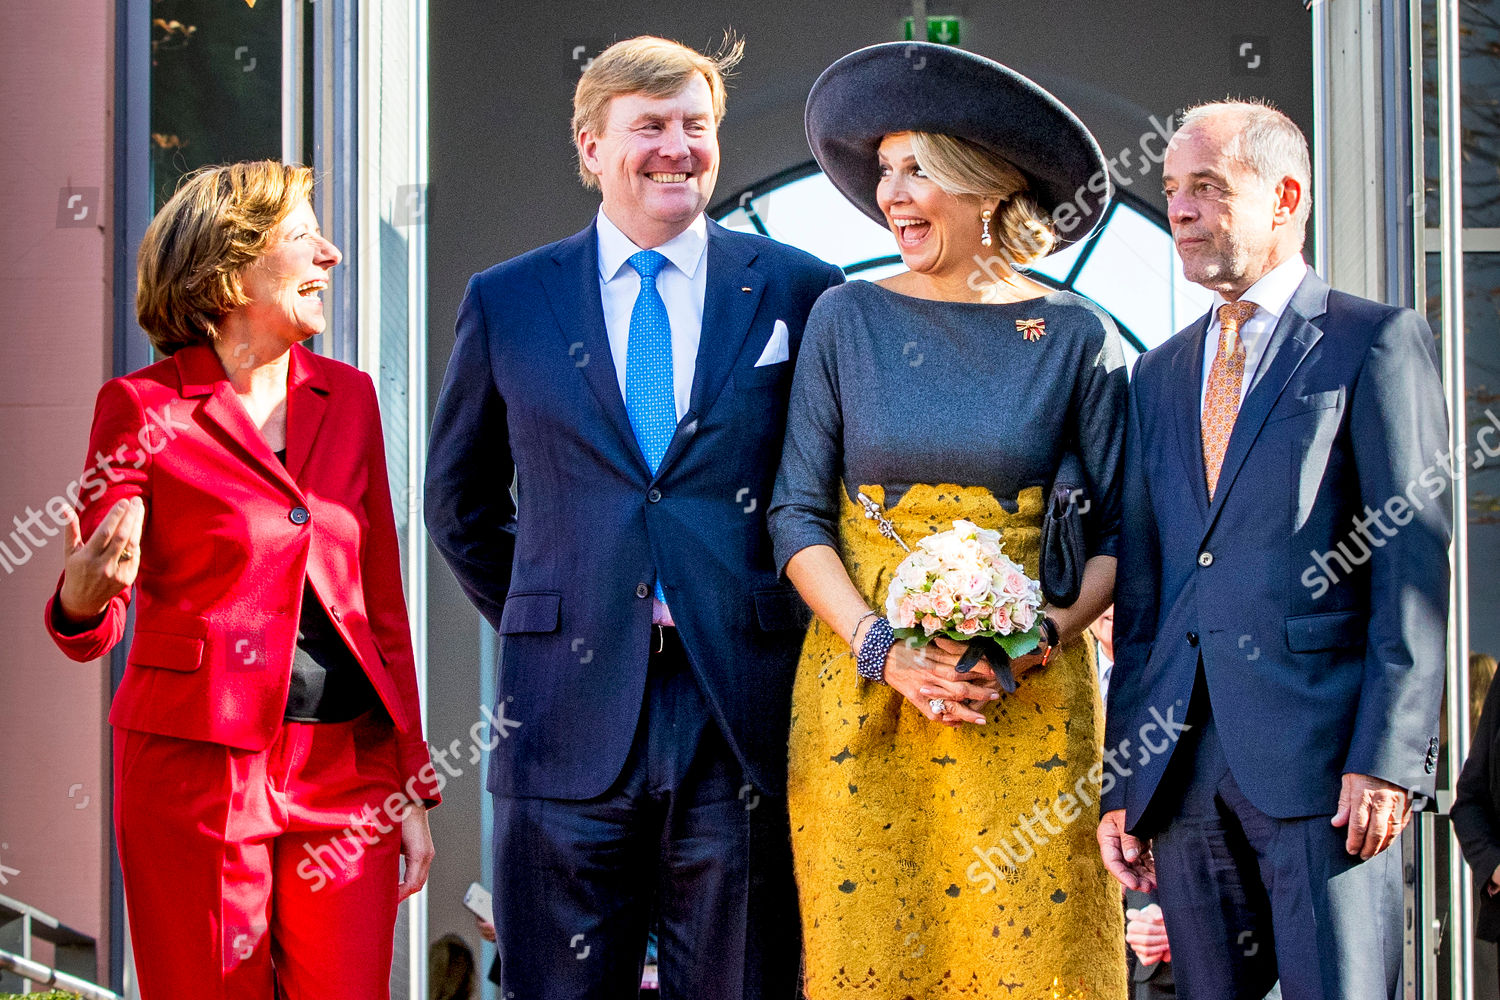 king-willem-alexander-and-queen-maxima-visit-to-germany-shutterstock-editorial-9921319w.jpg